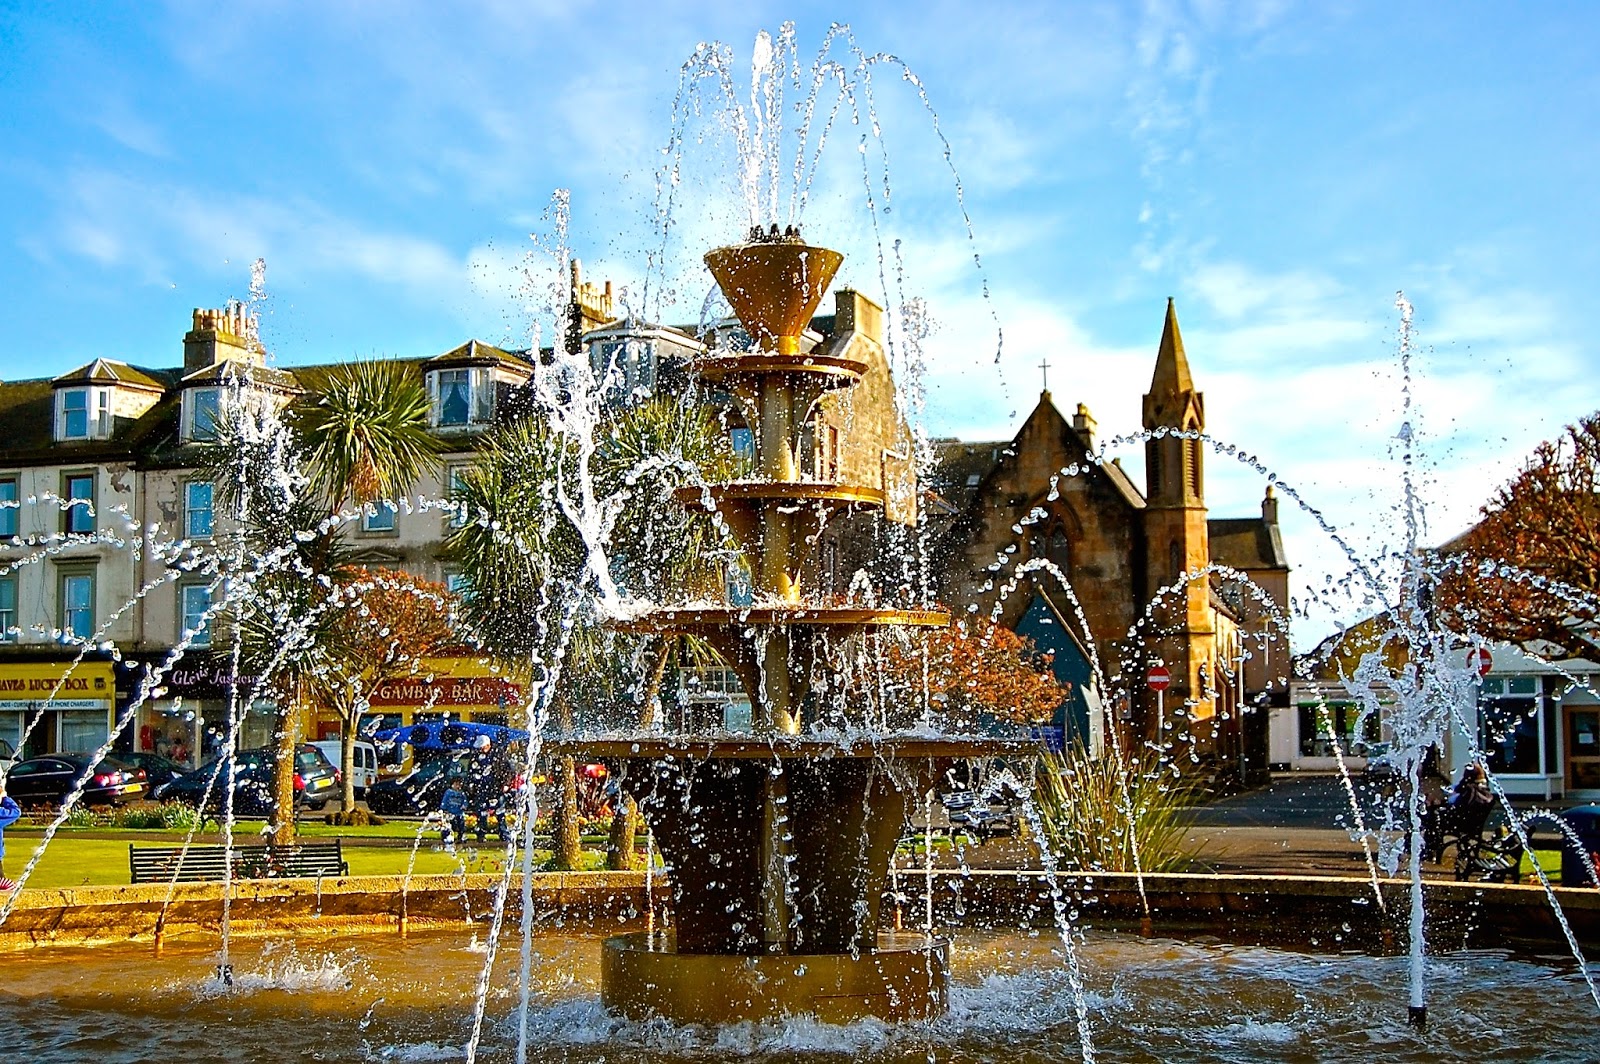 Five-tiered fountain on Rothesay's promenade, Isle of Bute